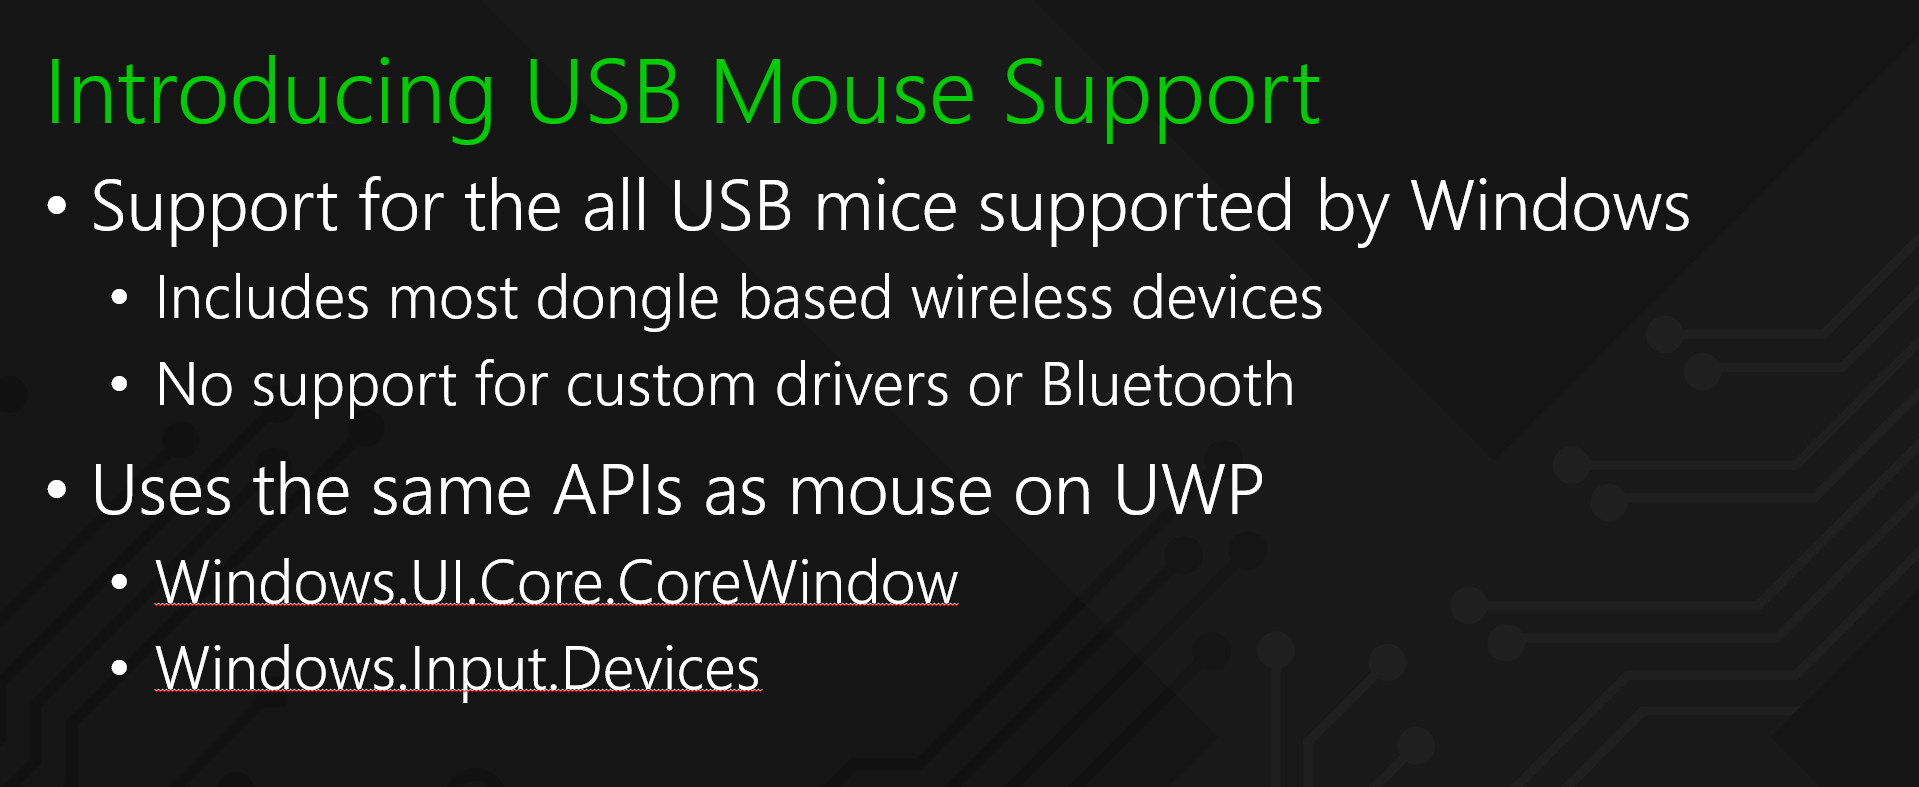 xbox-usb-mouse-support.png